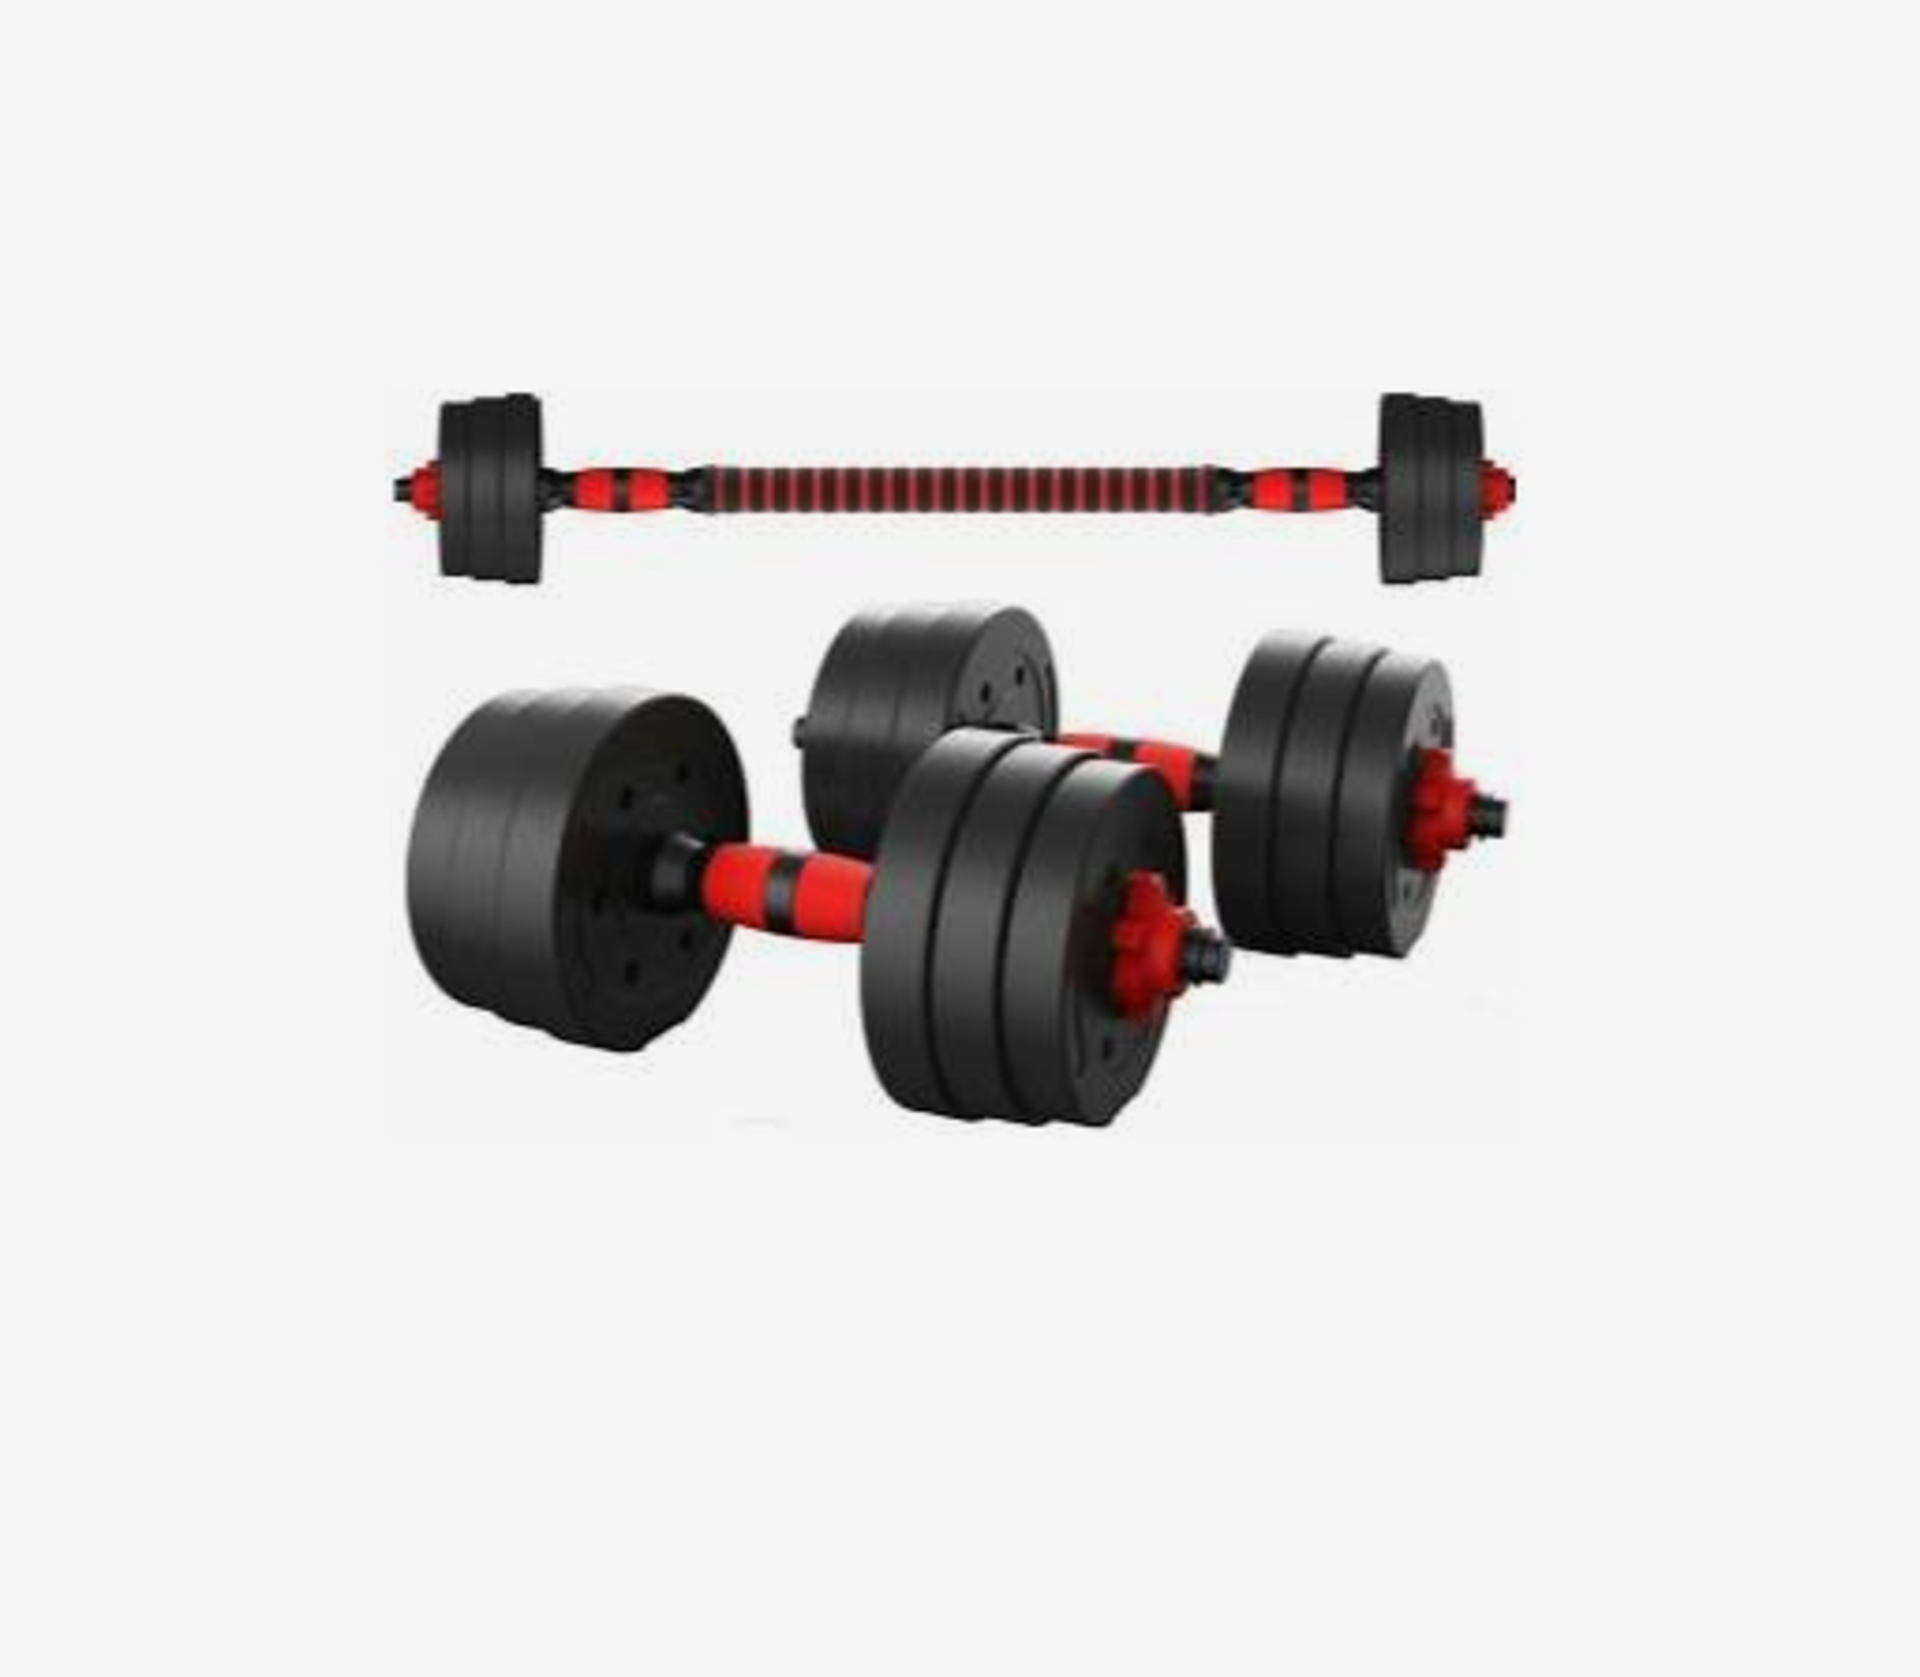 Unbranded - 30KG Weight Dumbbell Set ( Can Be Used As Weight Bar ) - New & Boxed.